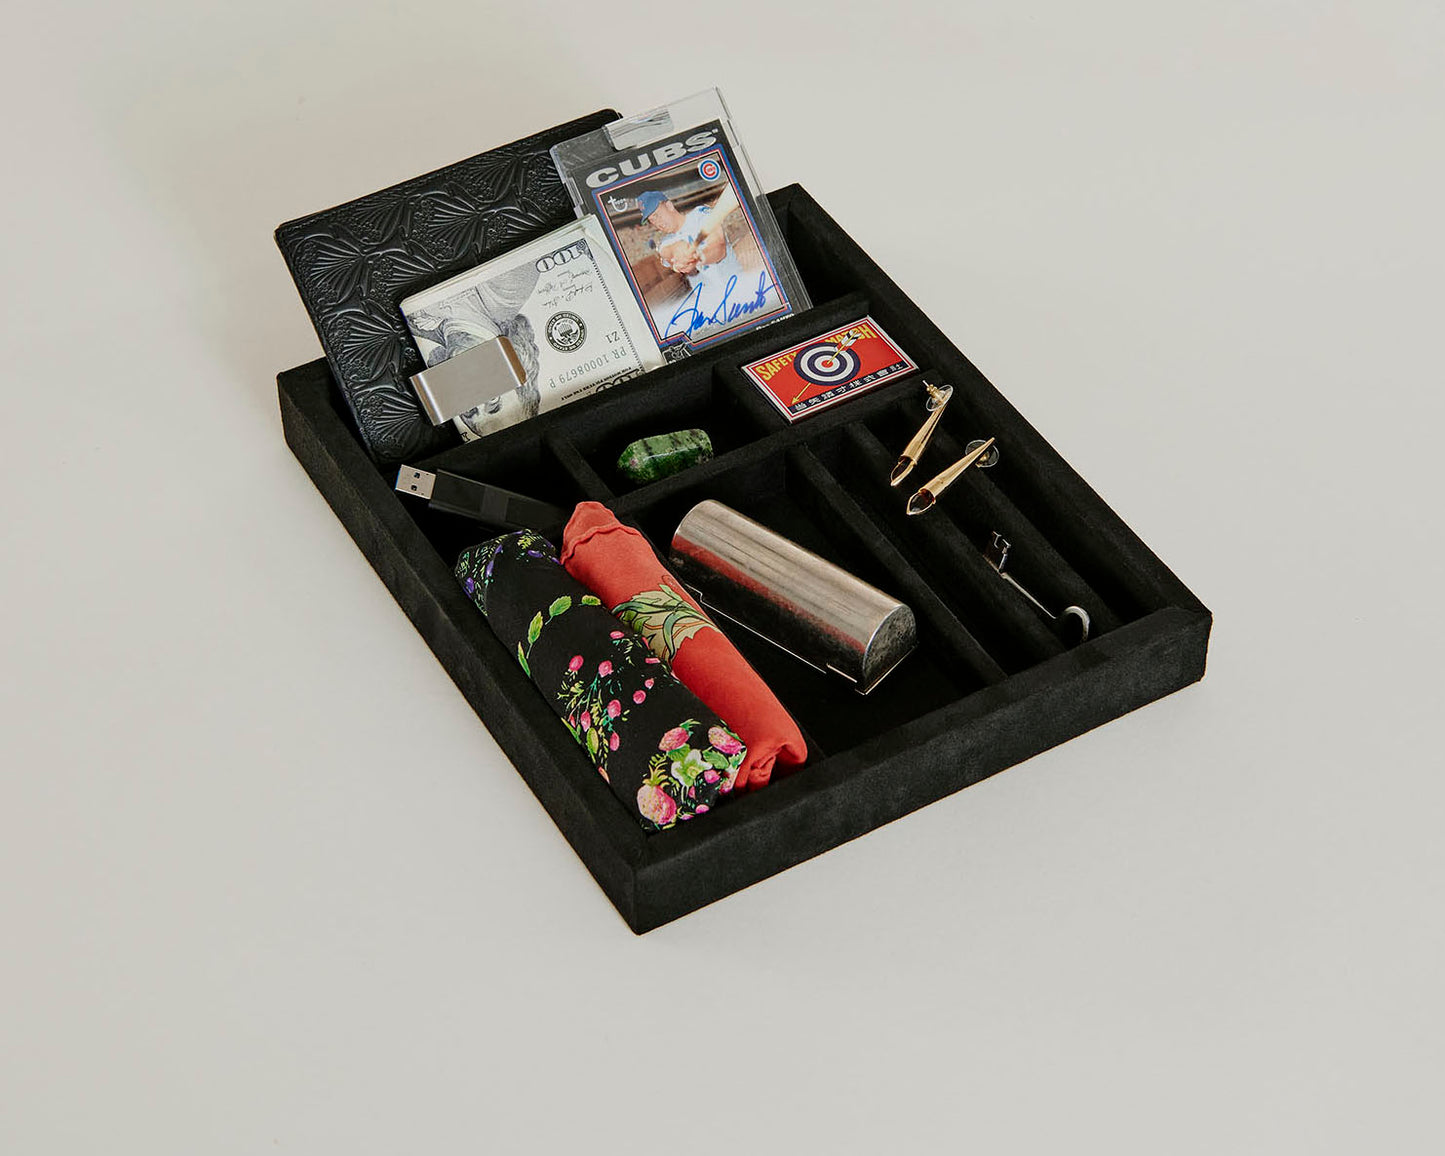 Black 7 Mix Tray with personal belongings